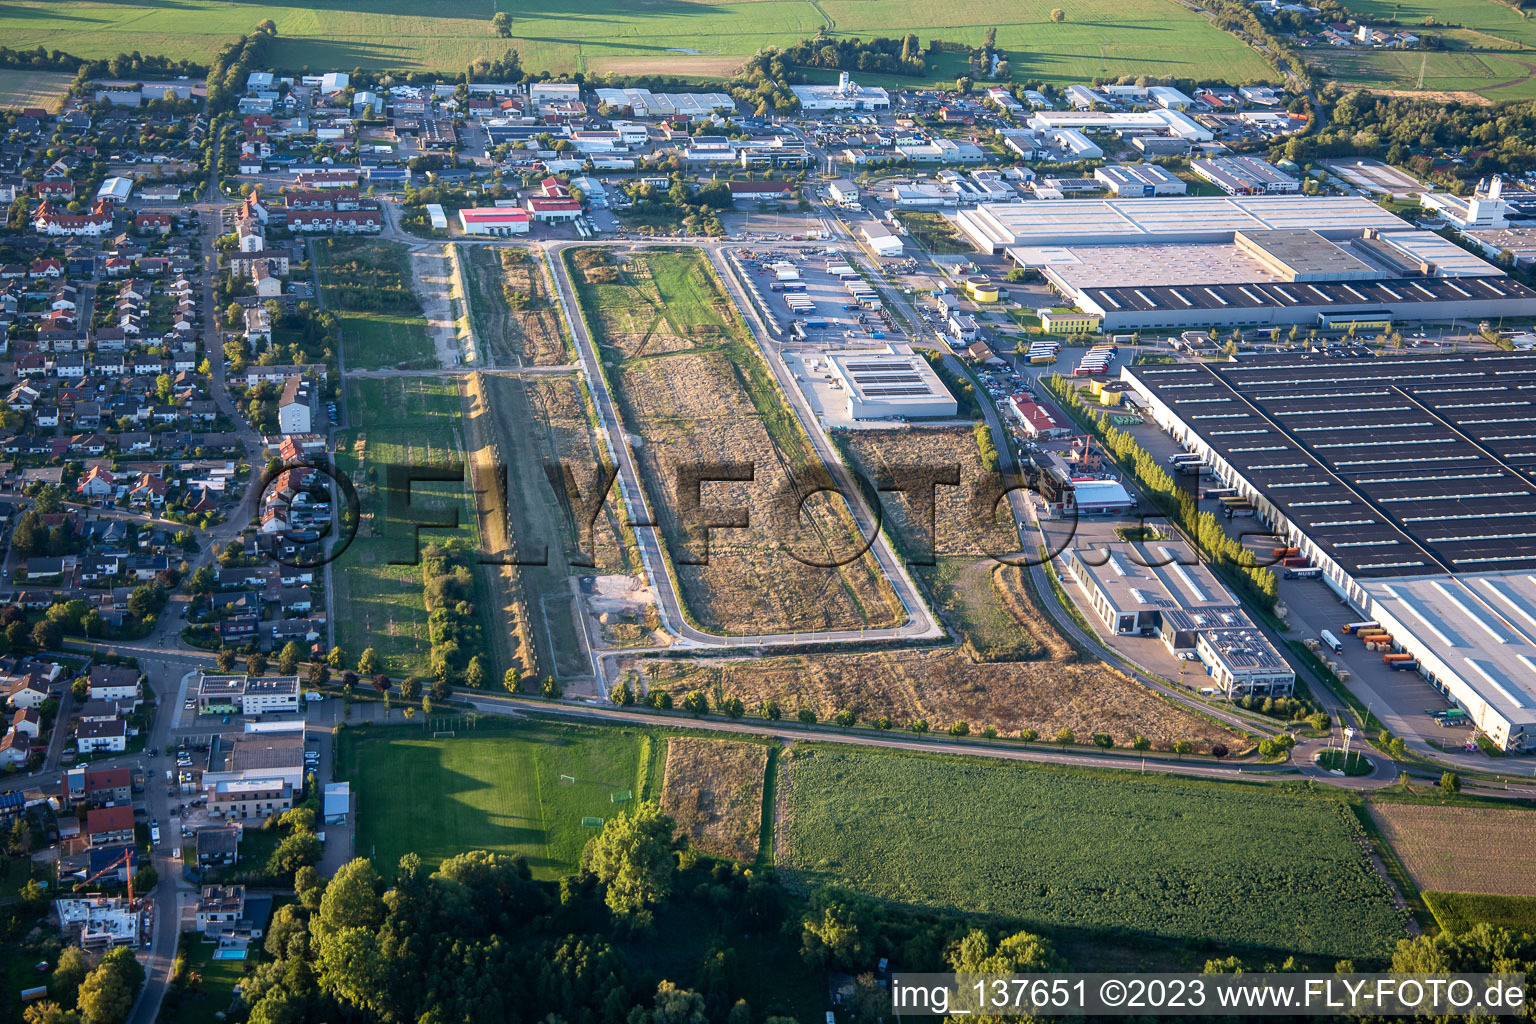 Development of the expansion of the Interpark in Offenbach an der Queich in the state Rhineland-Palatinate, Germany